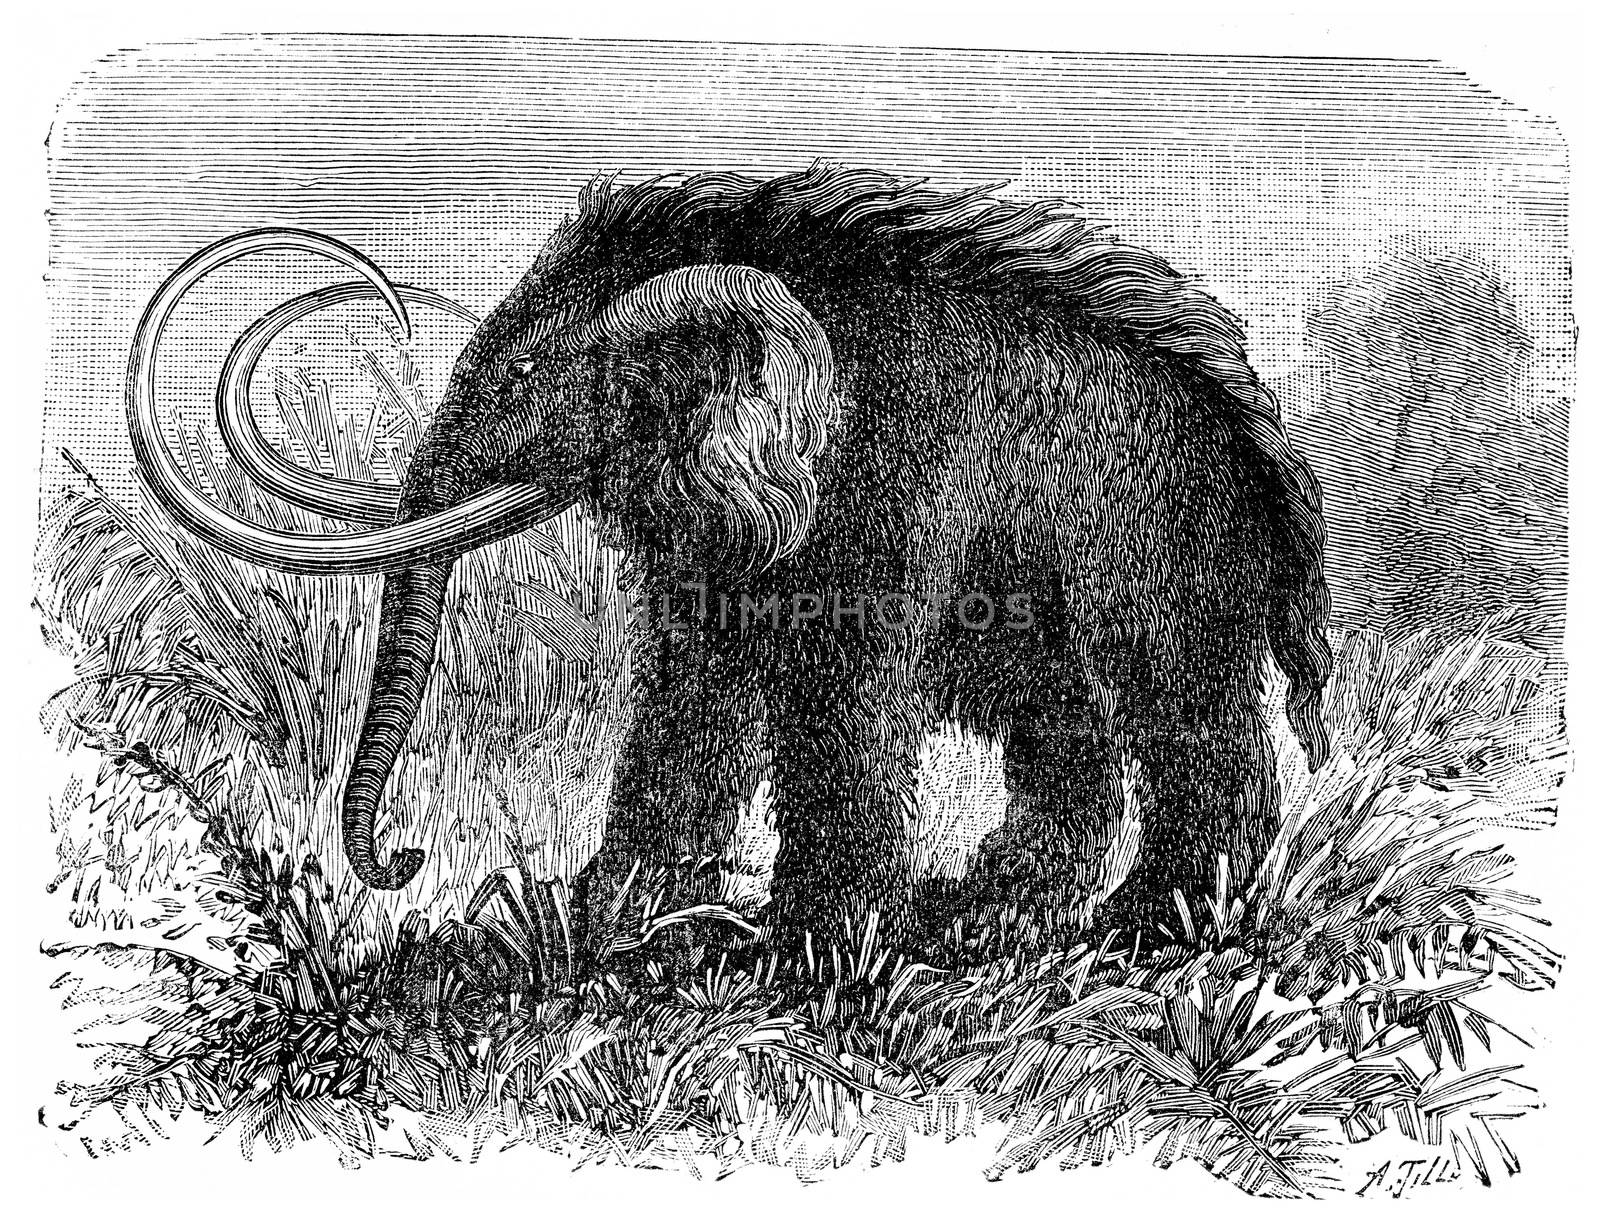 The mammoth, Elephas primigenius, vintage engraved illustration. Earth before man – 1886.